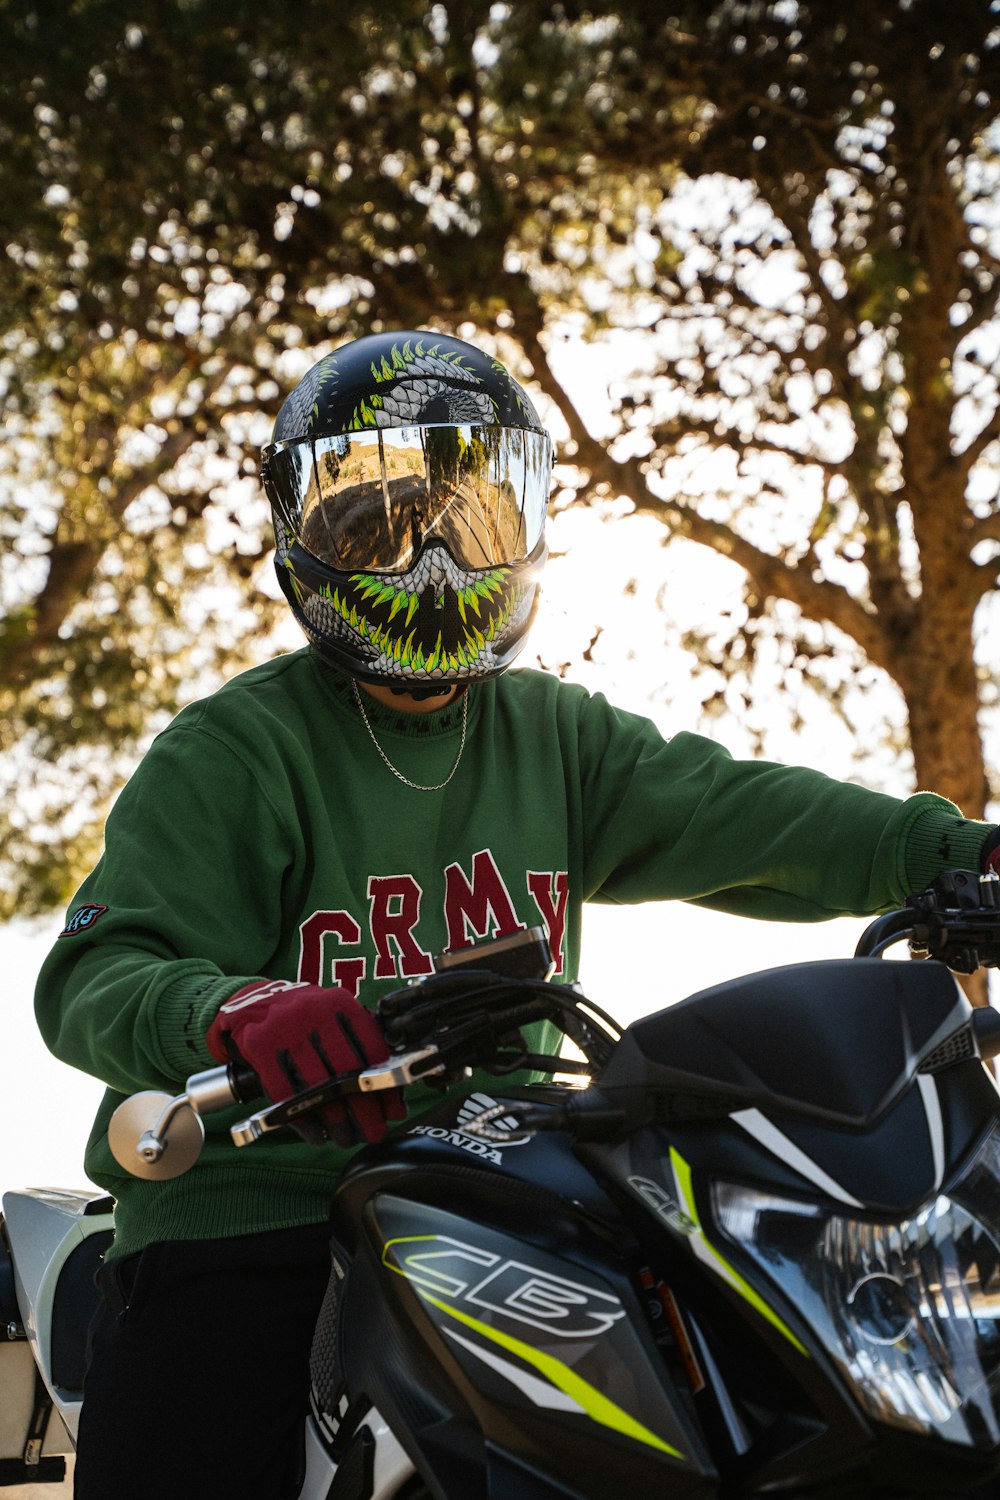 a person wearing a helmet and sitting on a motorcycle